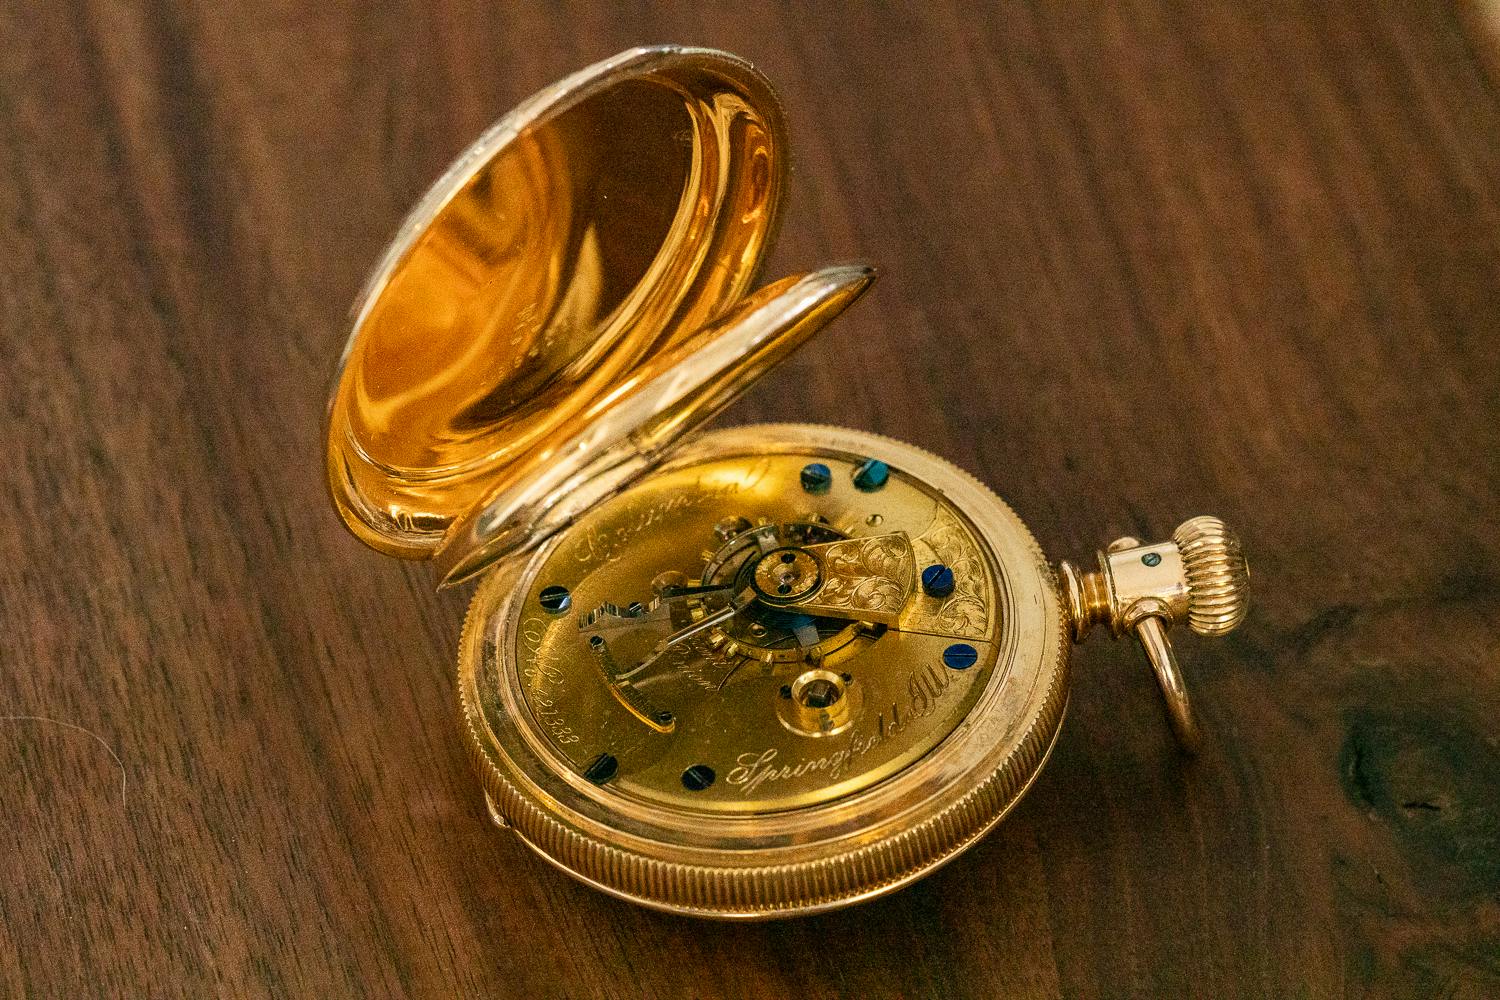 Restored pocket watch open showing the movement inside